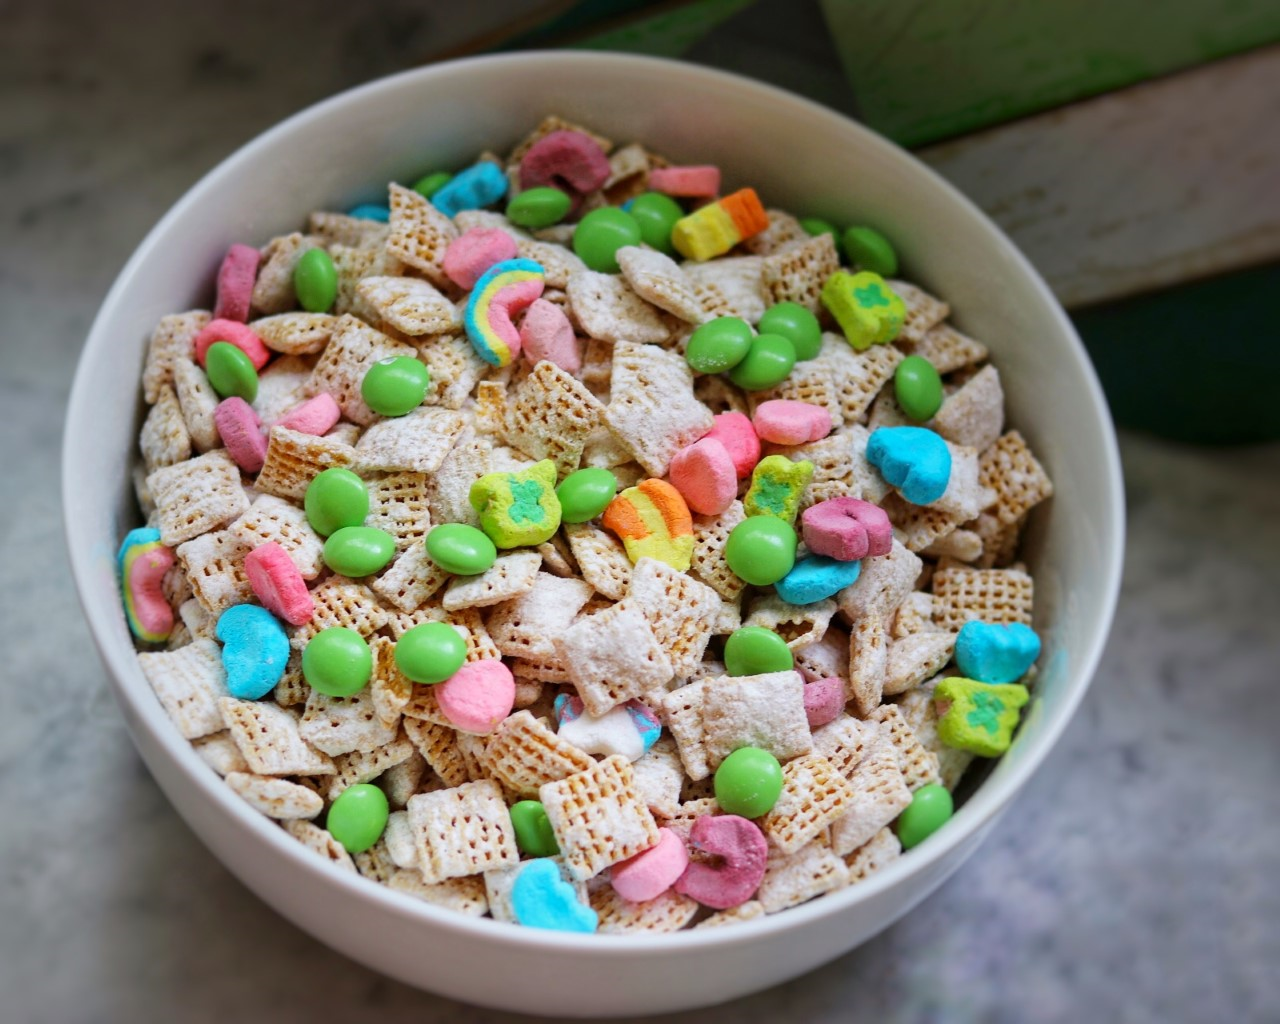 St. Patrick's Day snacks for kids - great easy party recipe idea: Leprechaun Snack Mix